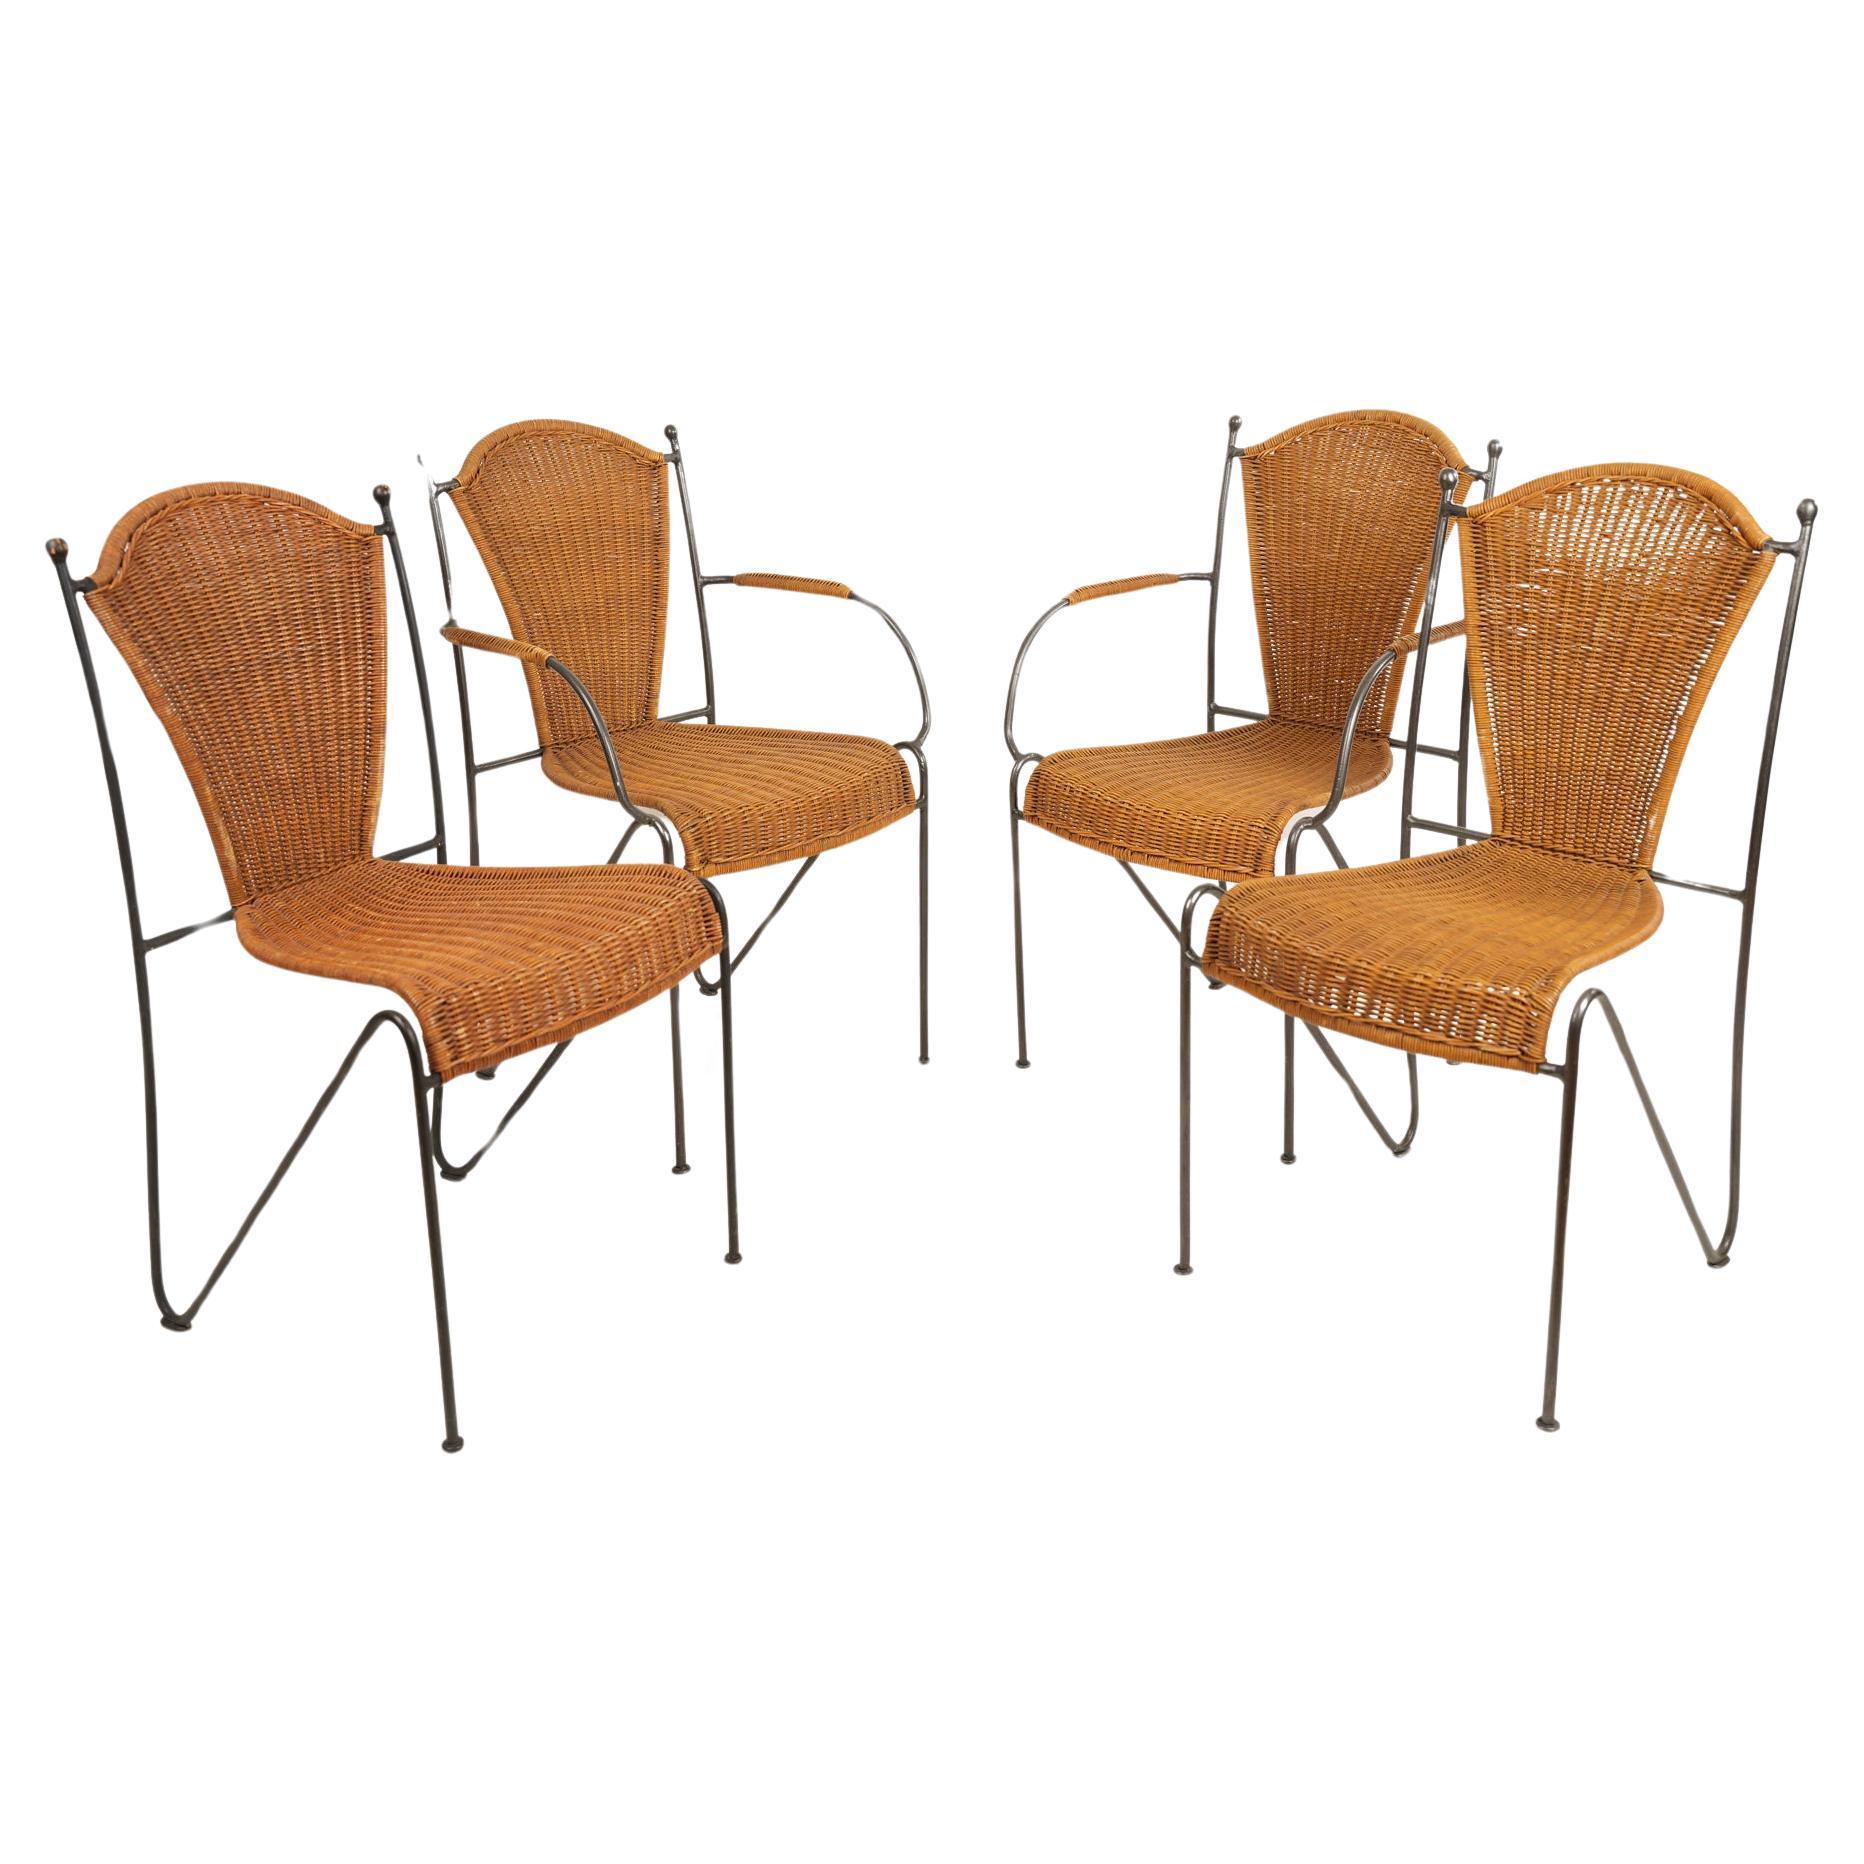 Set of Four Wicker and Iron Chair By Frederic Weinberg 1950s For Sale